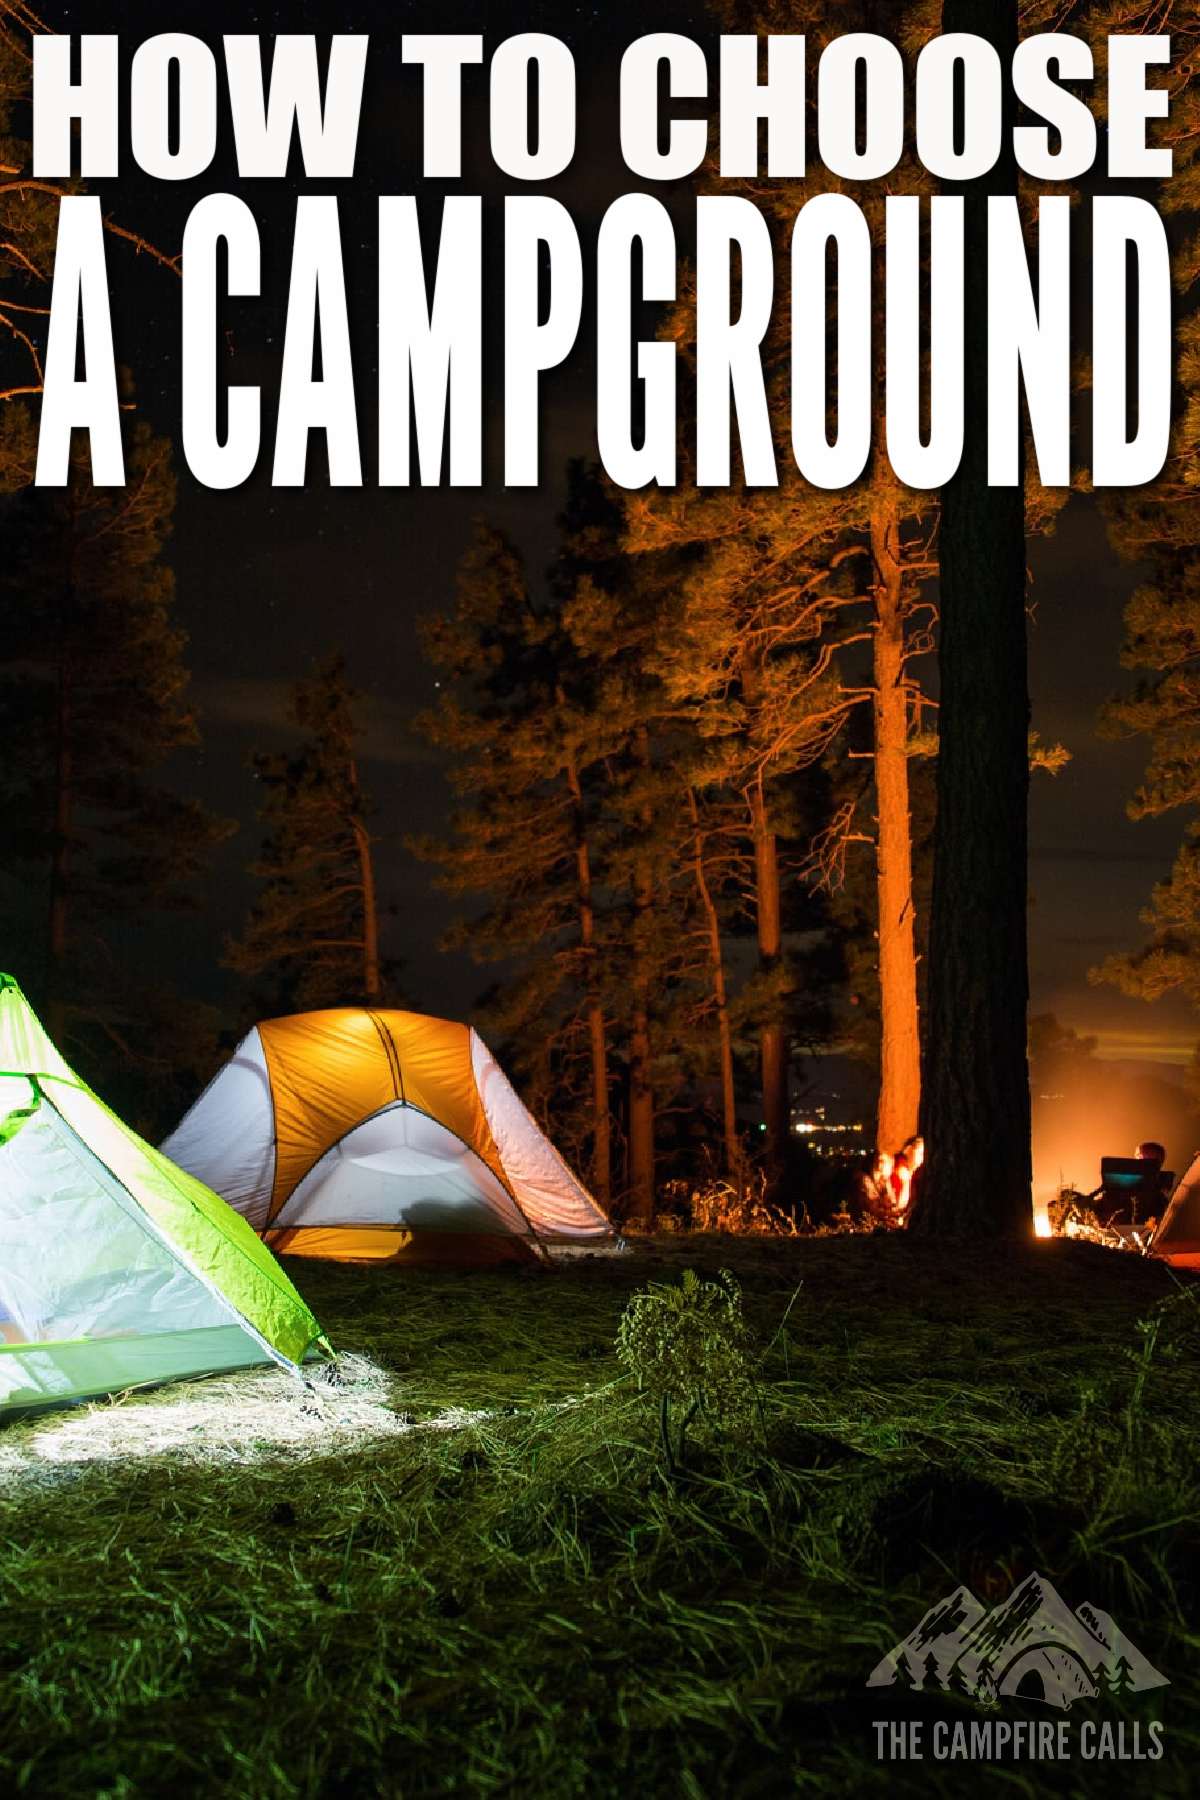 How to Choose a Campground for Tent Camping